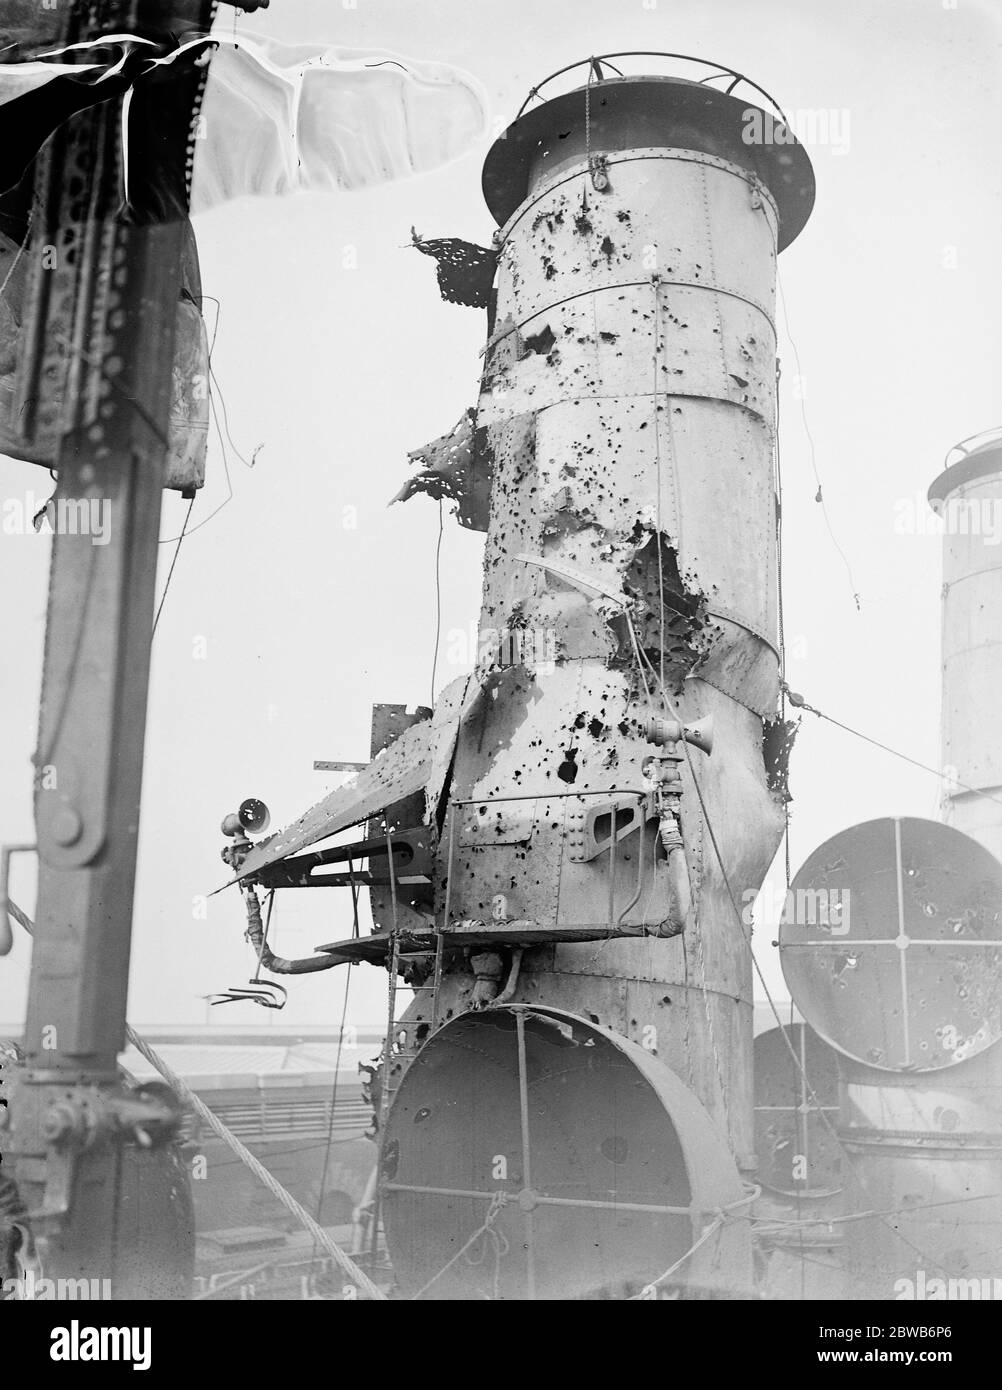 HMS Vindictive was a British protected cruiser . On 23 April 1918 she was in fierce action at Zeebrugge when she went alongside the Mole and her upperworks were badly damaged . The Fore funnel 1918 Stock Photo